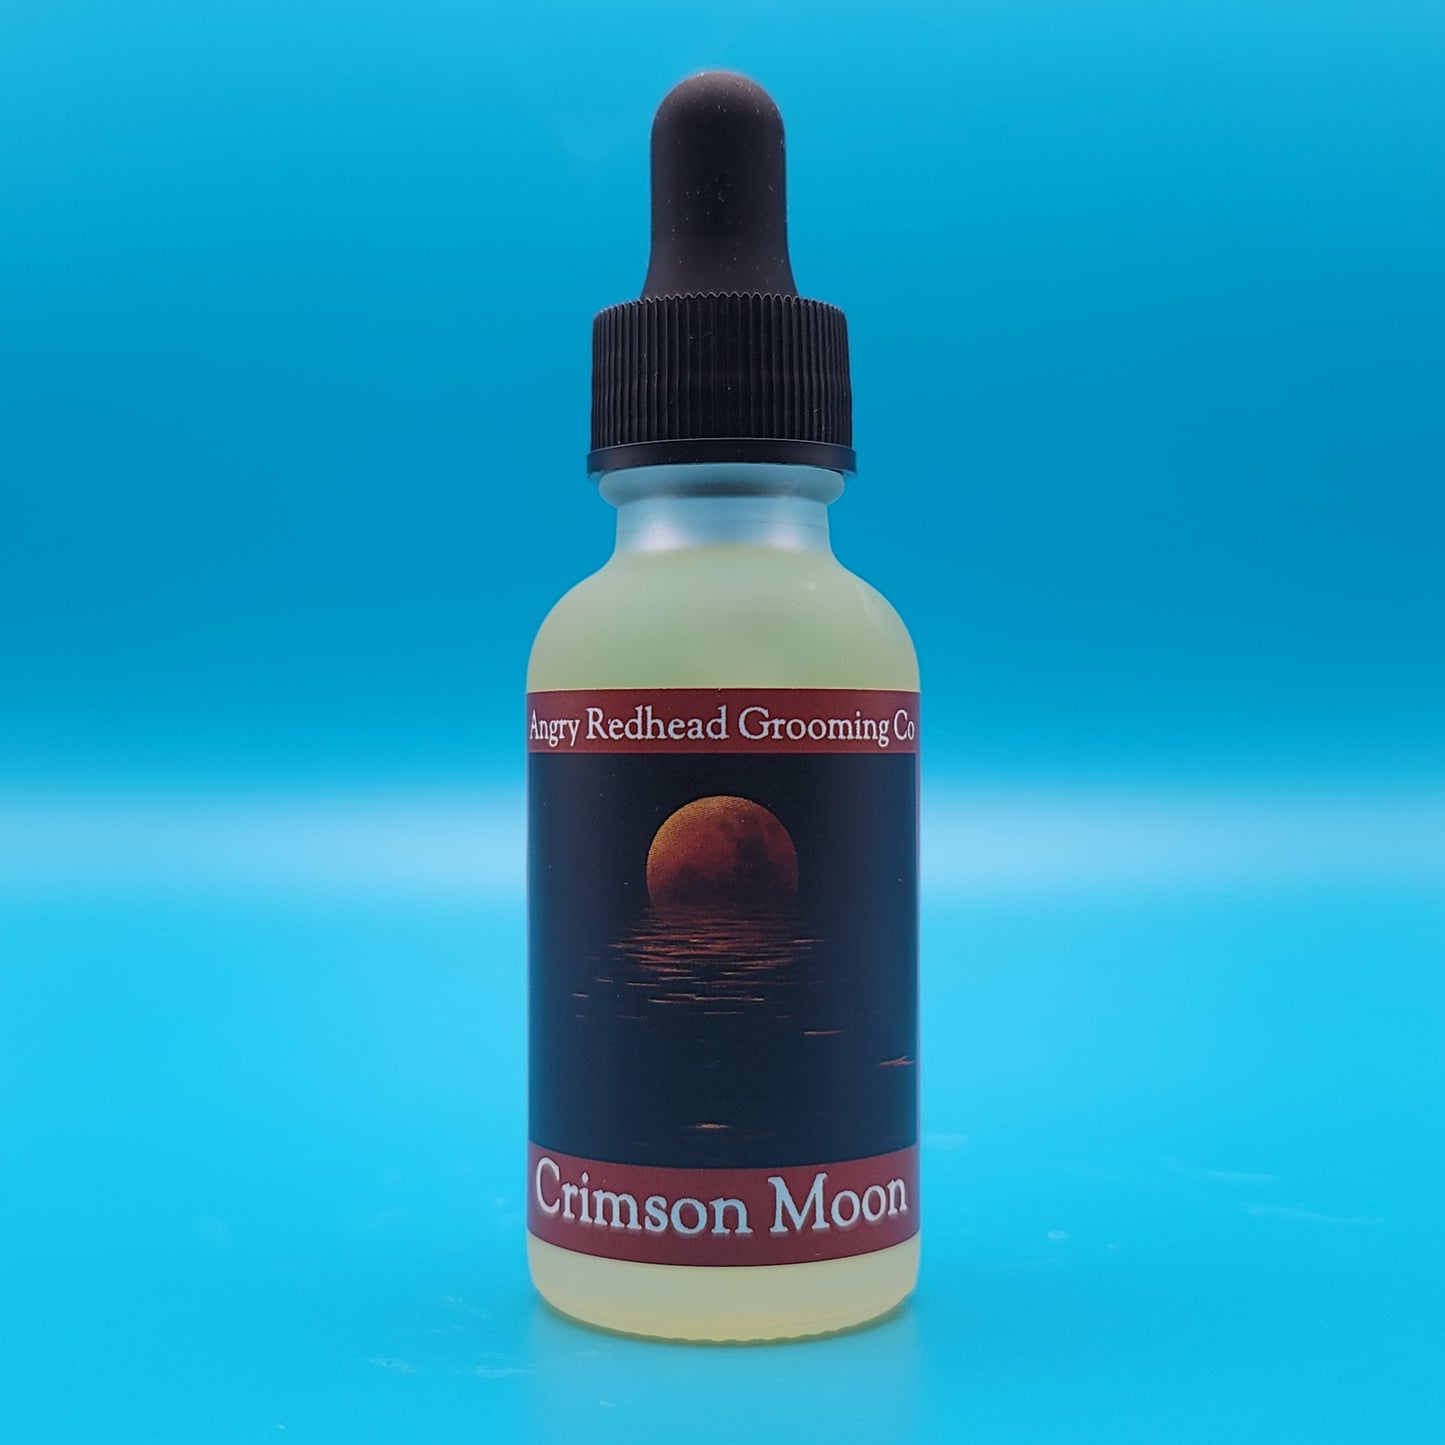 Crimson Moon Pre-Shave Oil by Angry Redhead Grooming Co - angryredheadgrooming.com